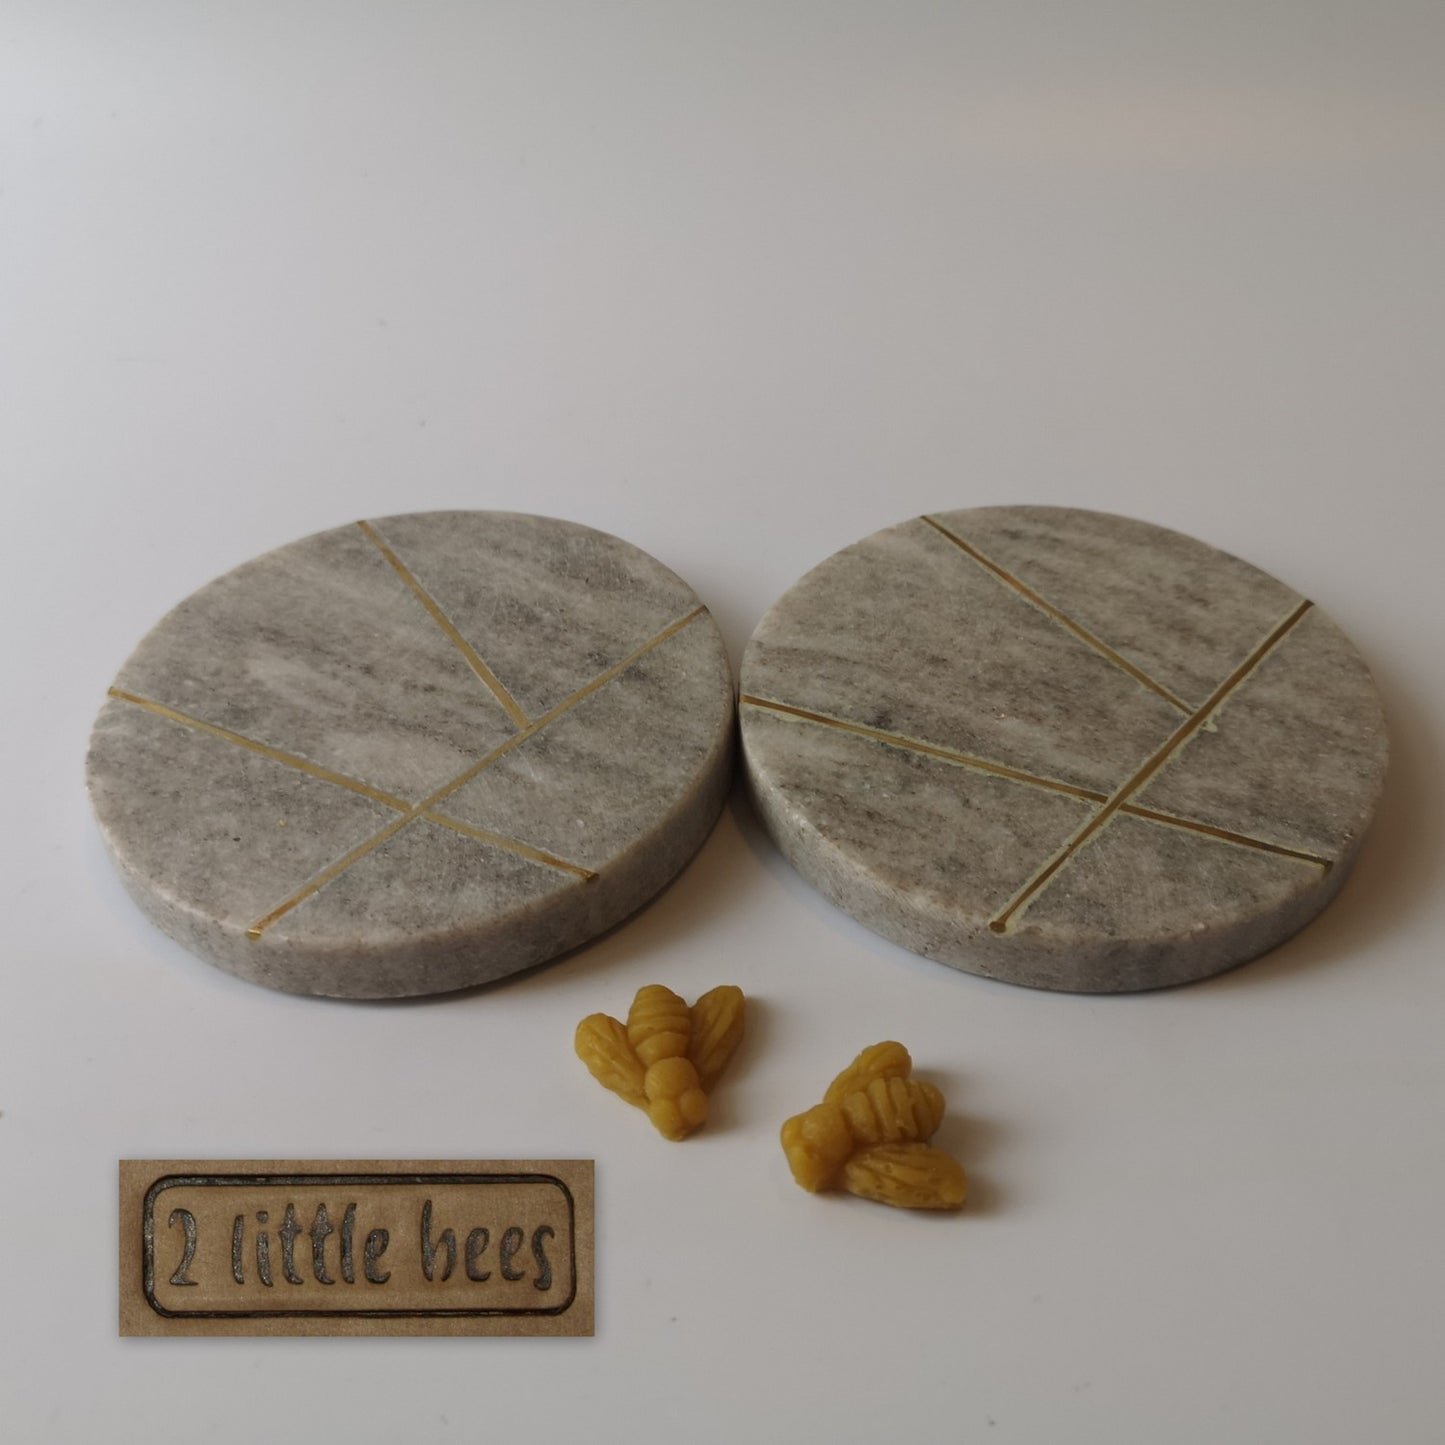 Gift set. 2 x Beeswax candles. Stone holders. Chocolate. Gift box. - 2 little bees